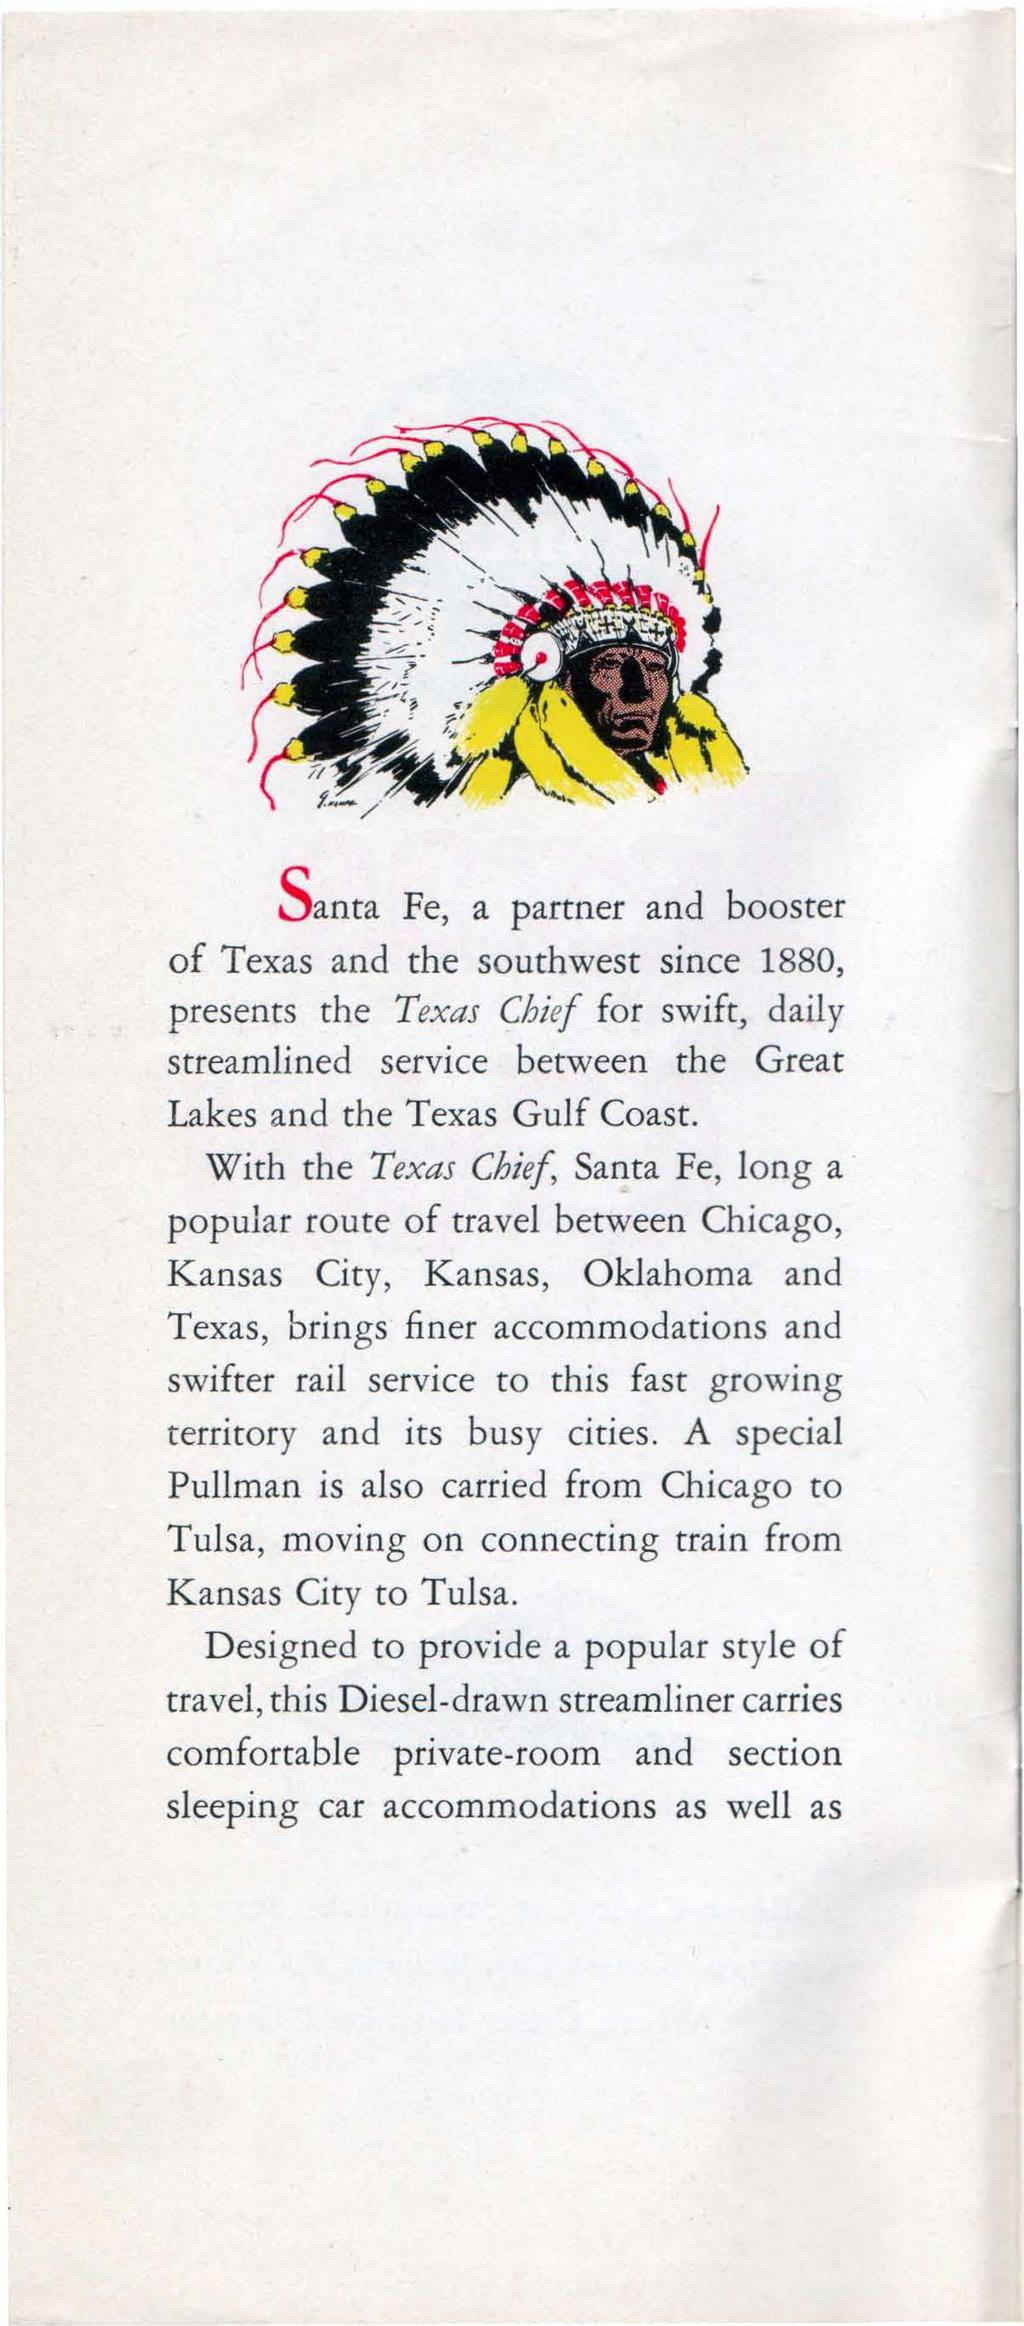 S anta Fe, a partner and booster of Texas and the southwest since 1880, presents the Texas Chief for swift, daily streamlined service between the Great Lakes and the Texas Gulf Coast.